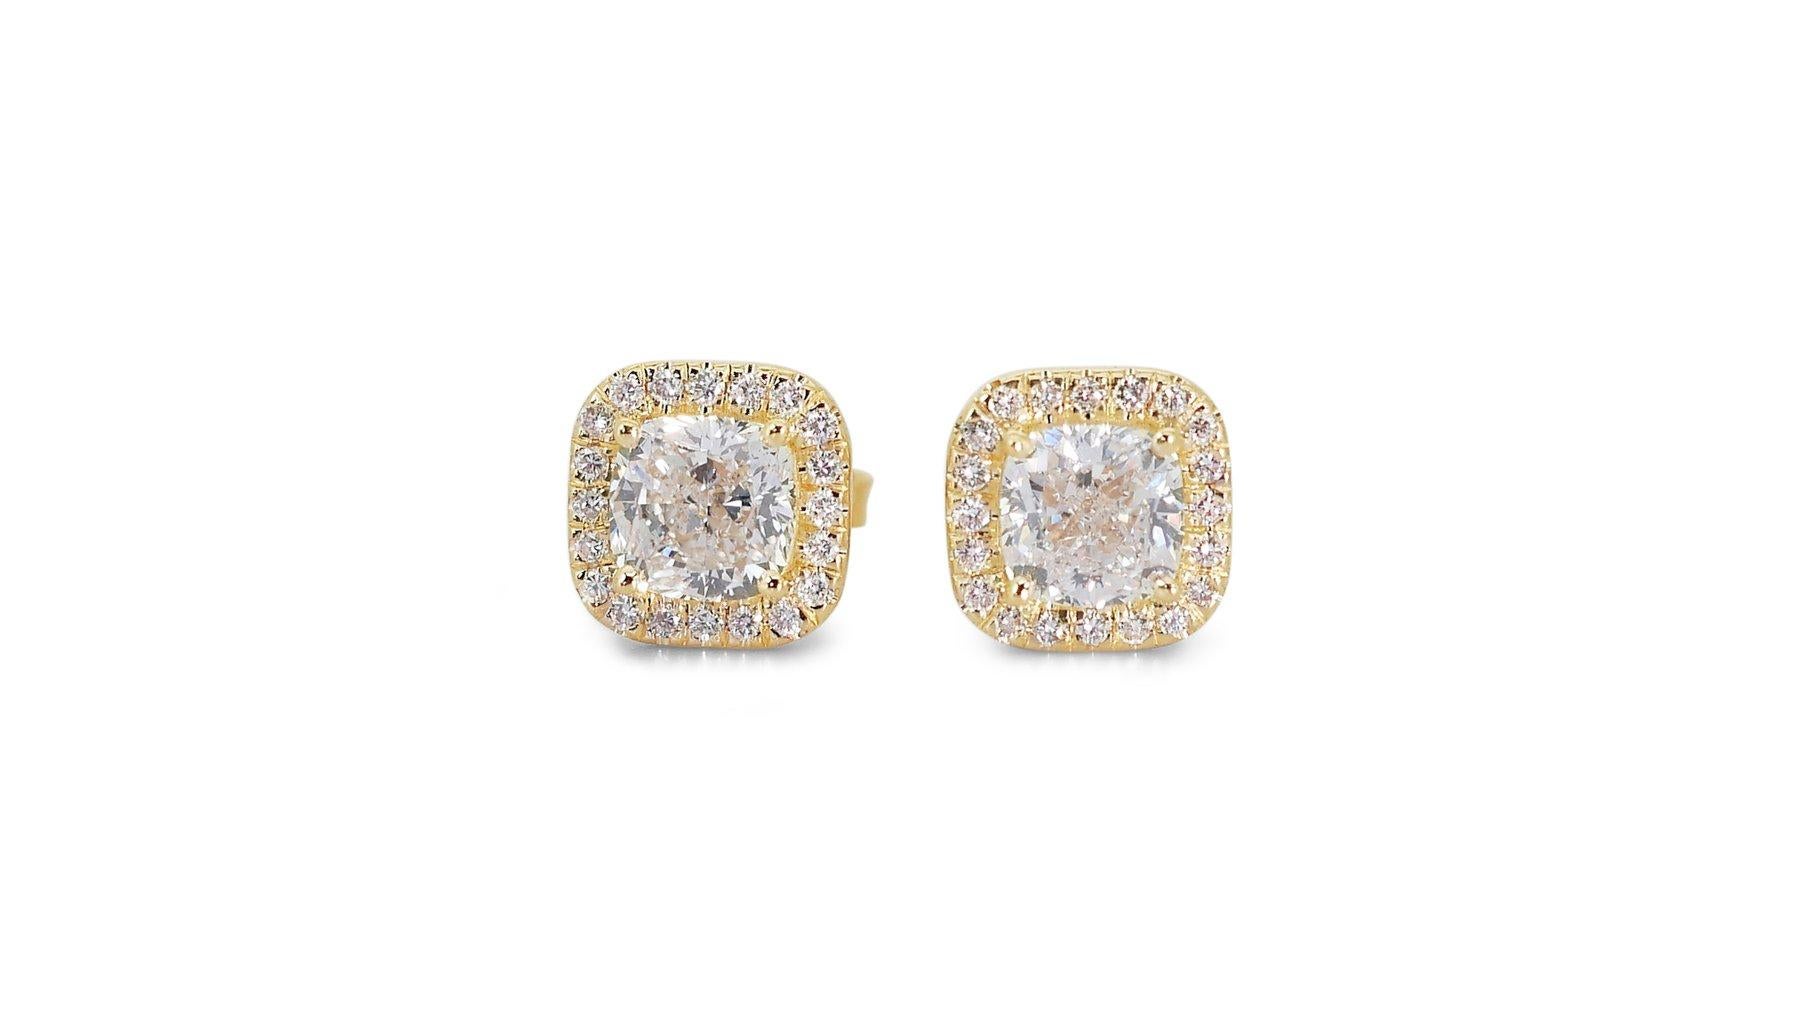 Mesmerizing Pair of Earrings with 3 carat Cushion Shape Natural Diamonds For Sale 1